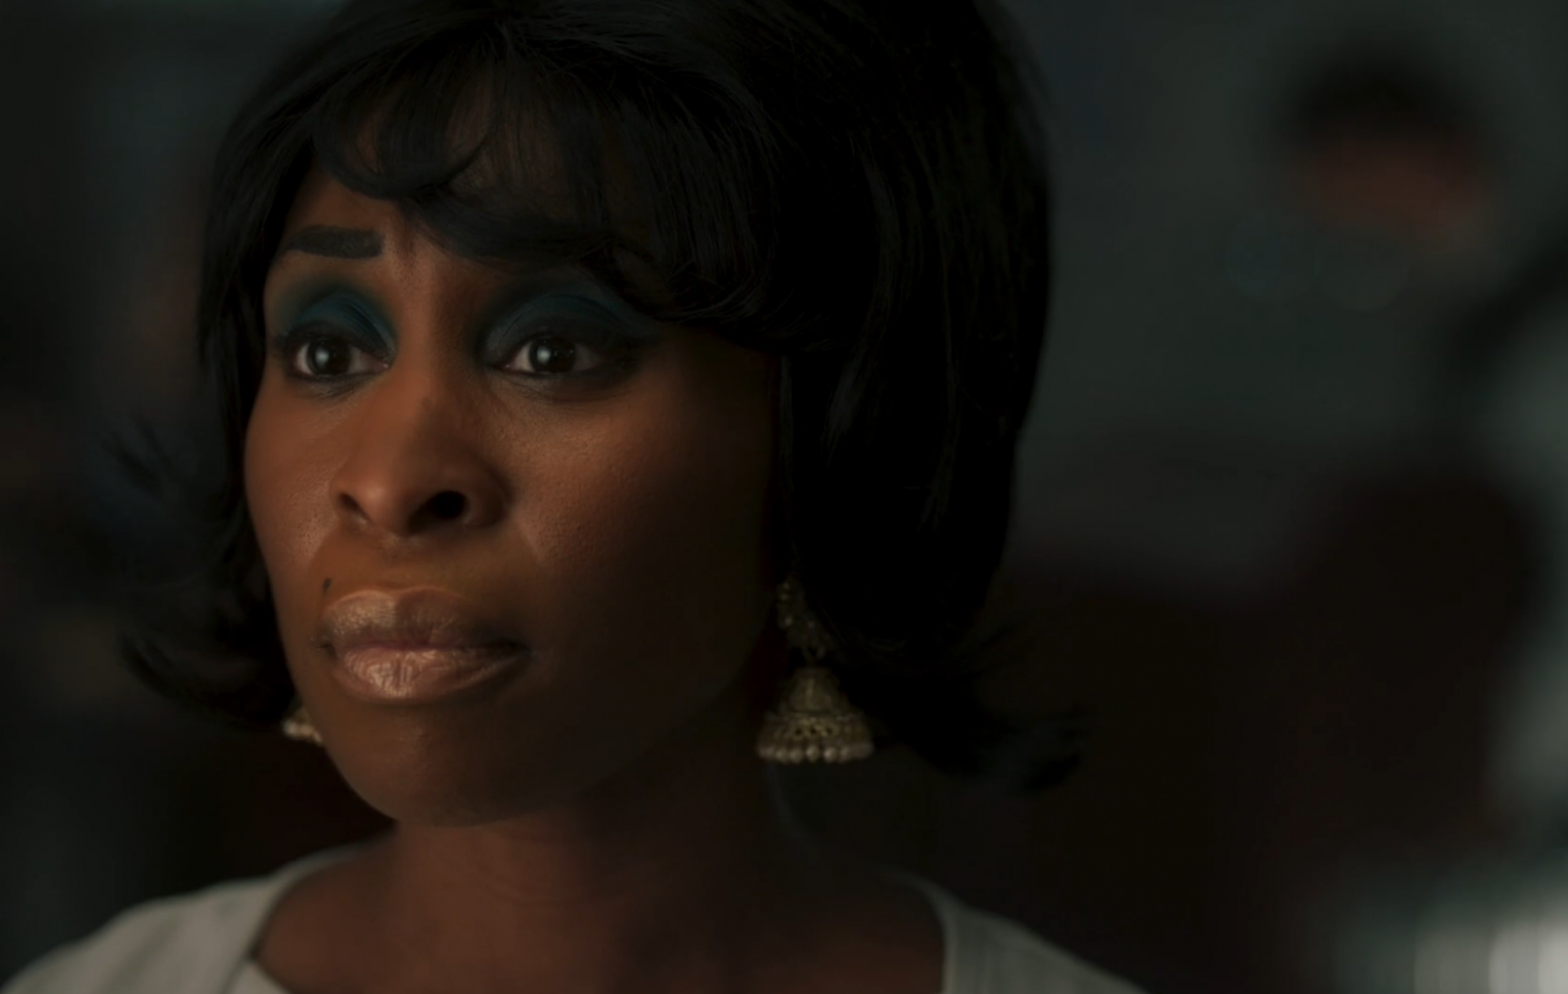 Cynthia Erivo Becomes Aretha Franklin In New Teaser For 'Genius: Aretha'